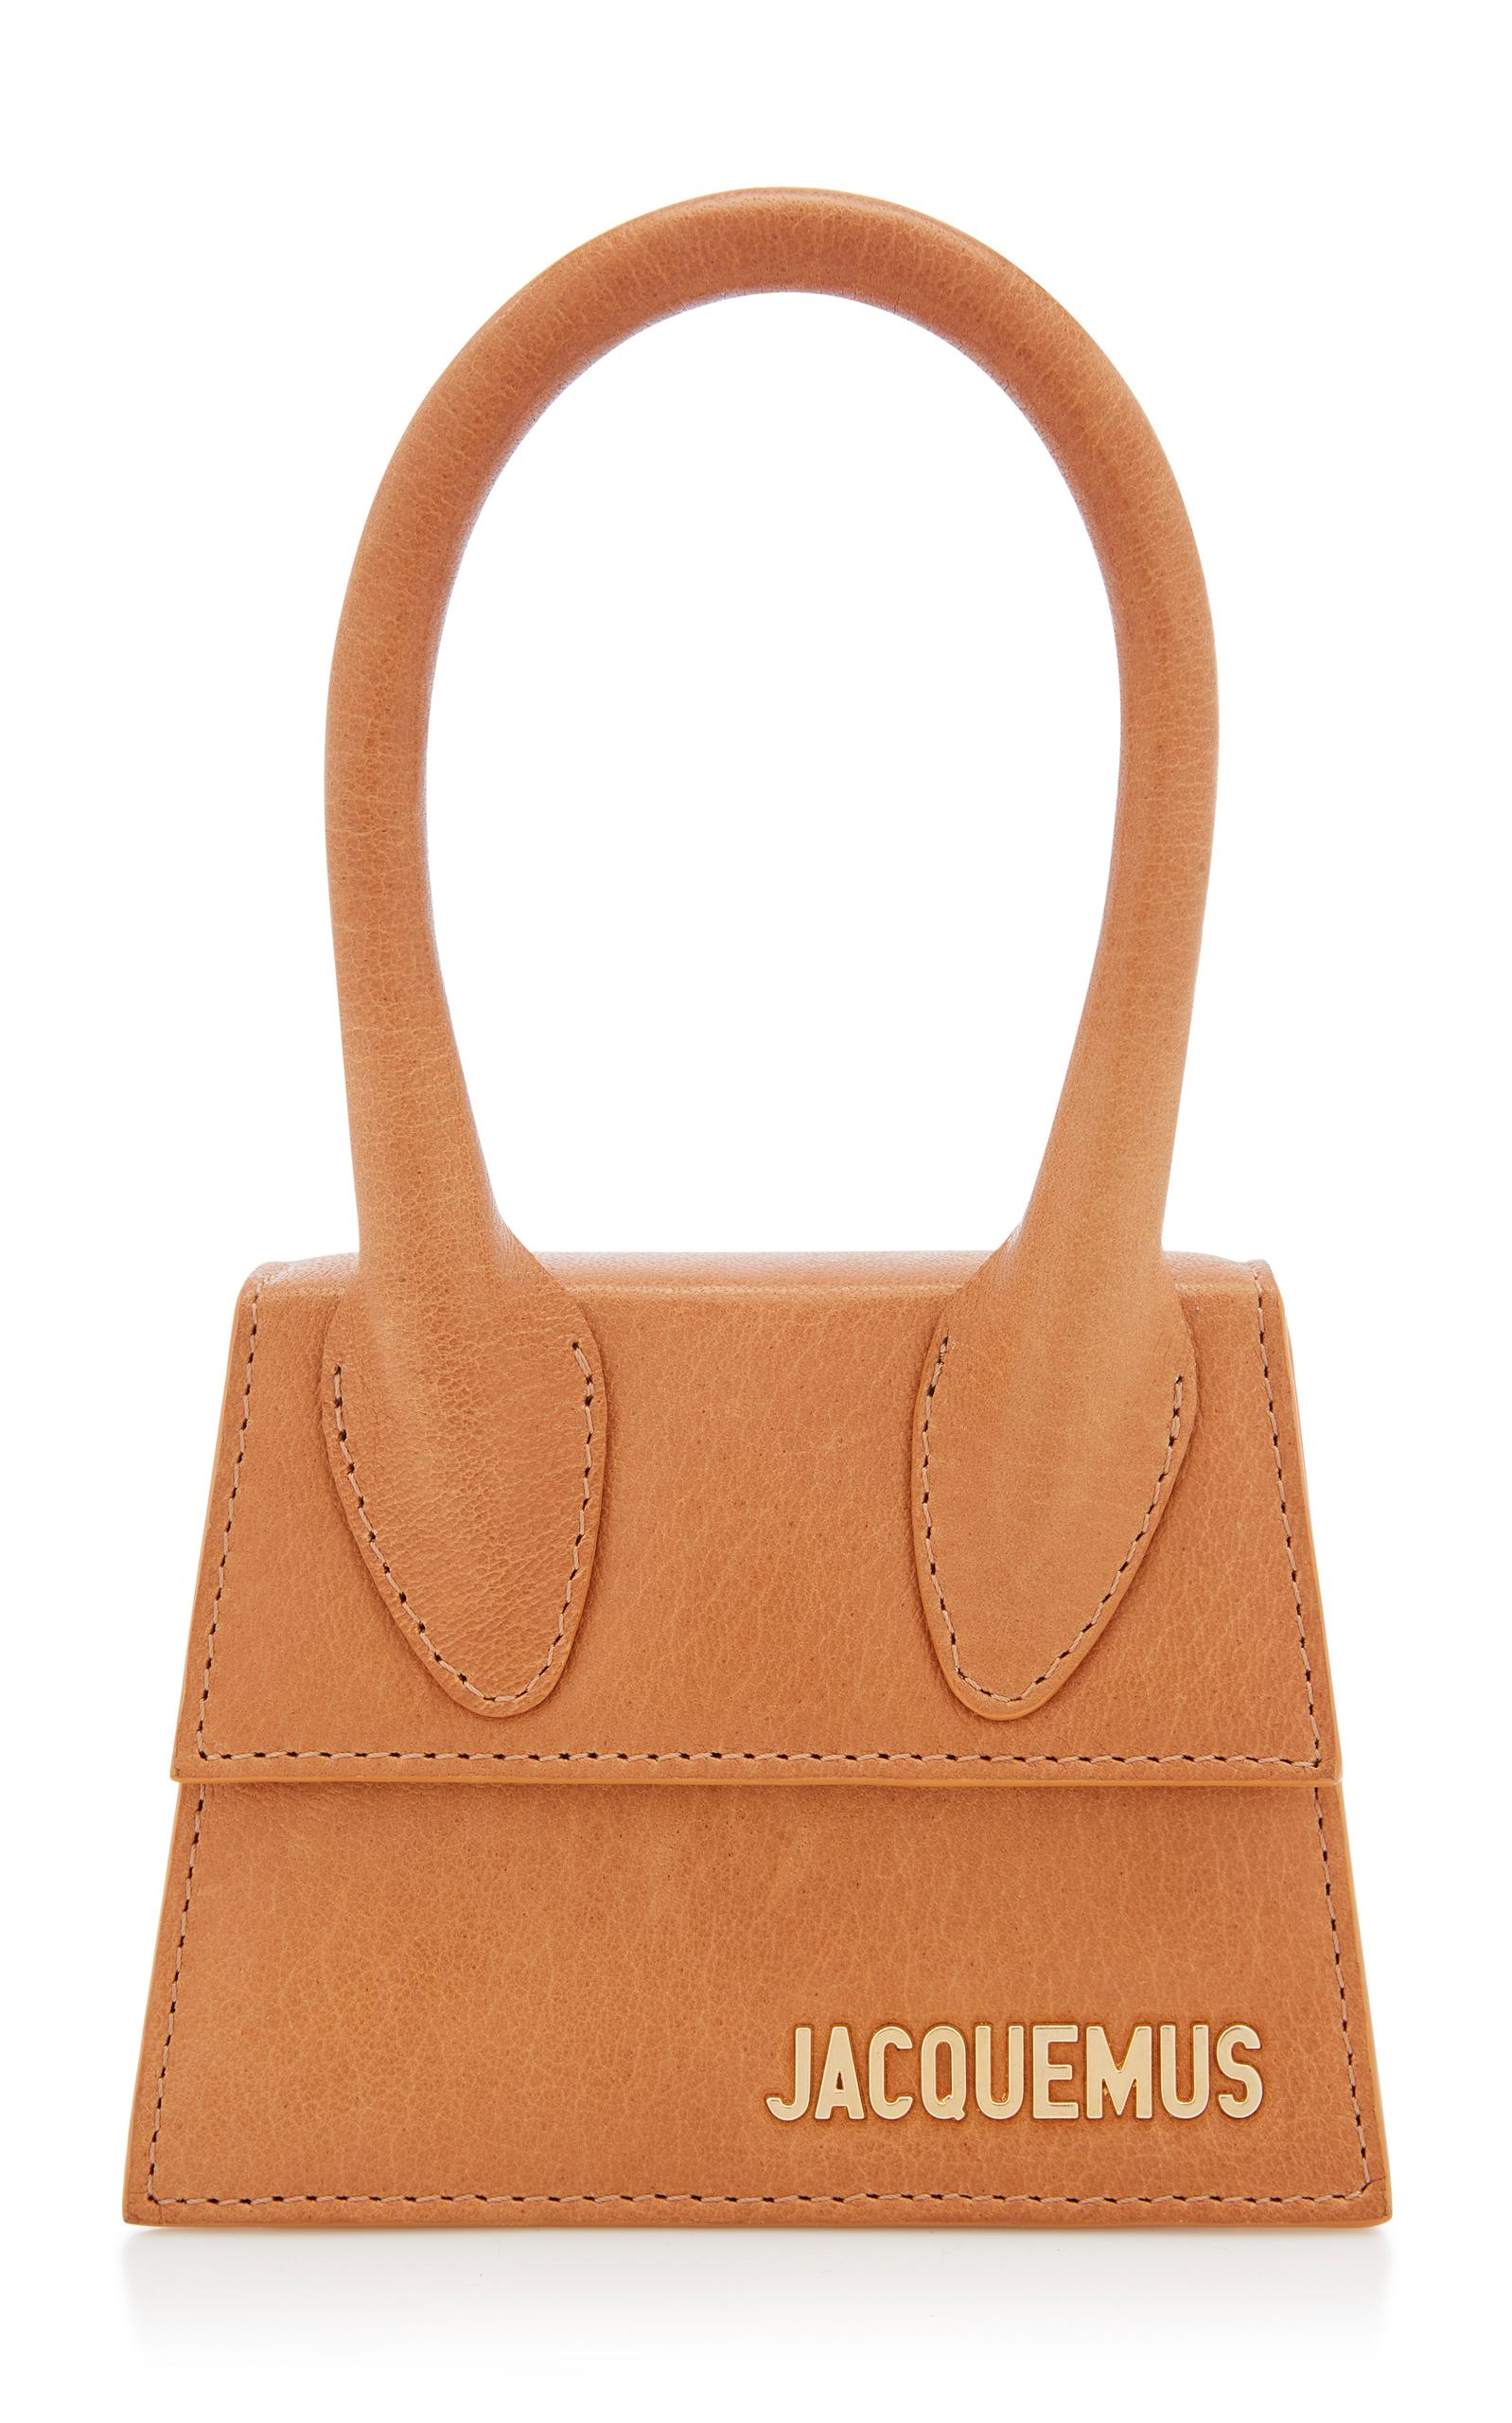 Jacquemus Suede Le Sac Chiquito in Brown - Lyst